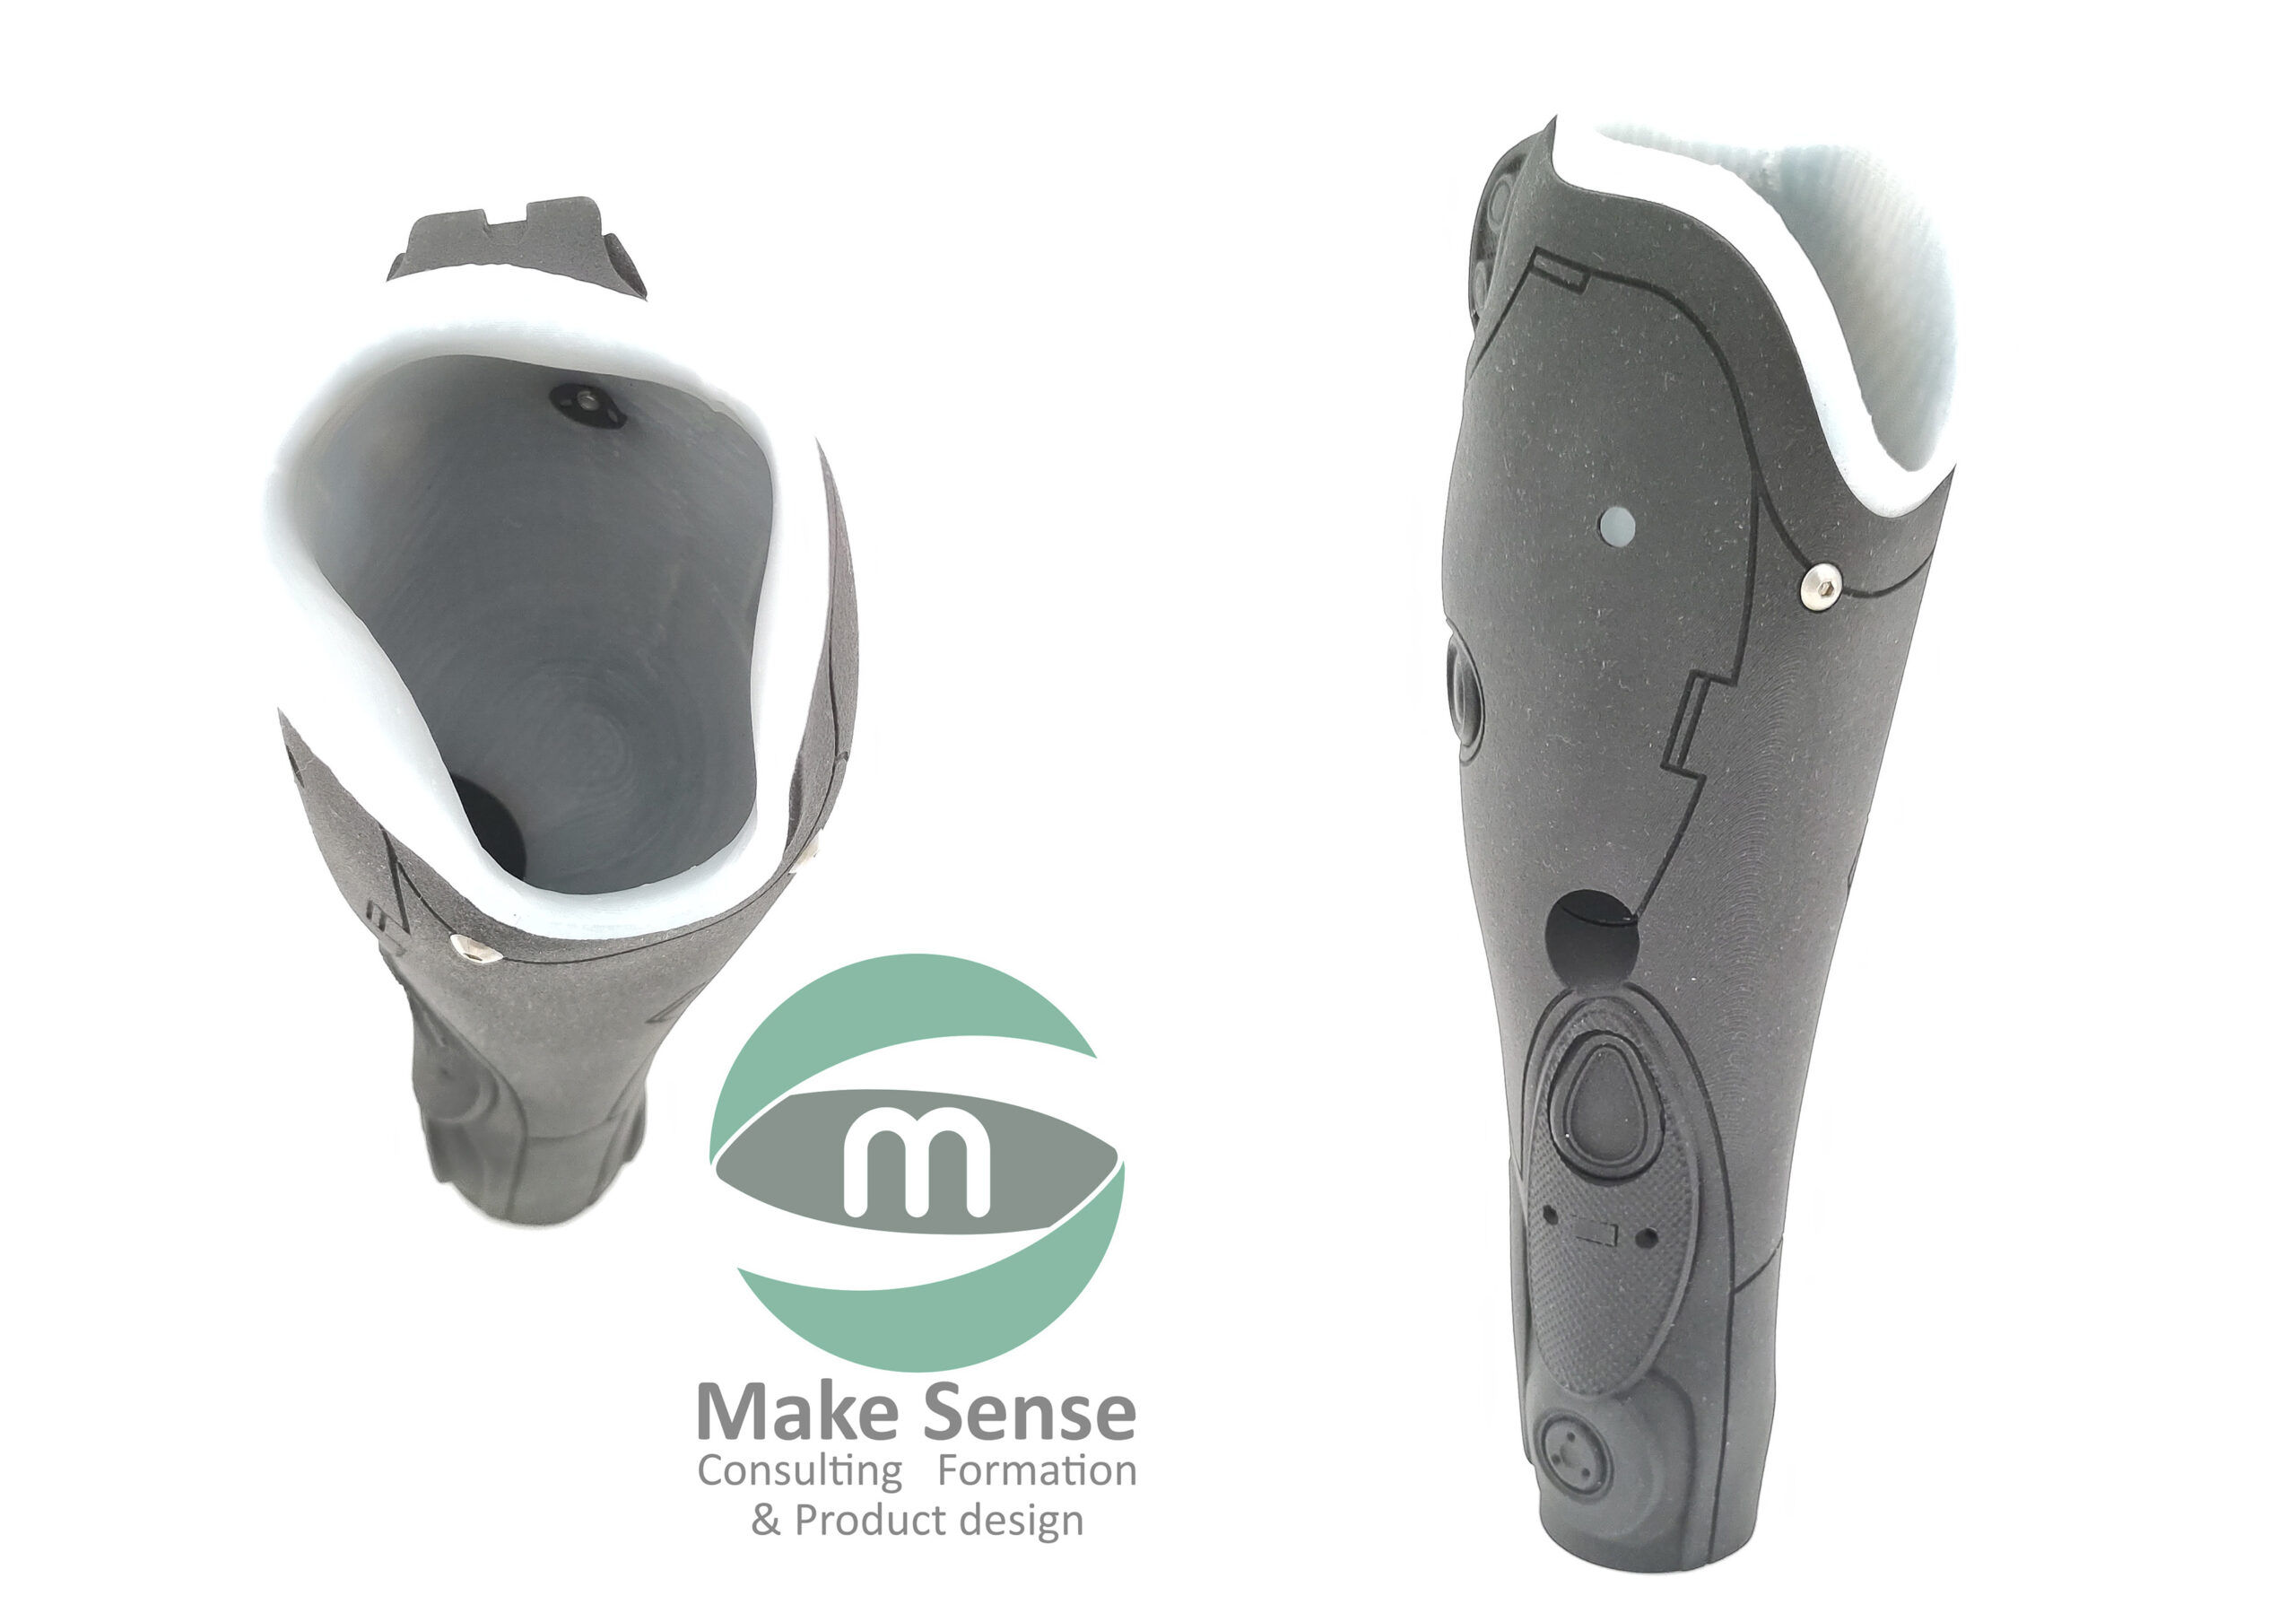 Mechatronic prosthesis by Make Sense and 3D printed socket